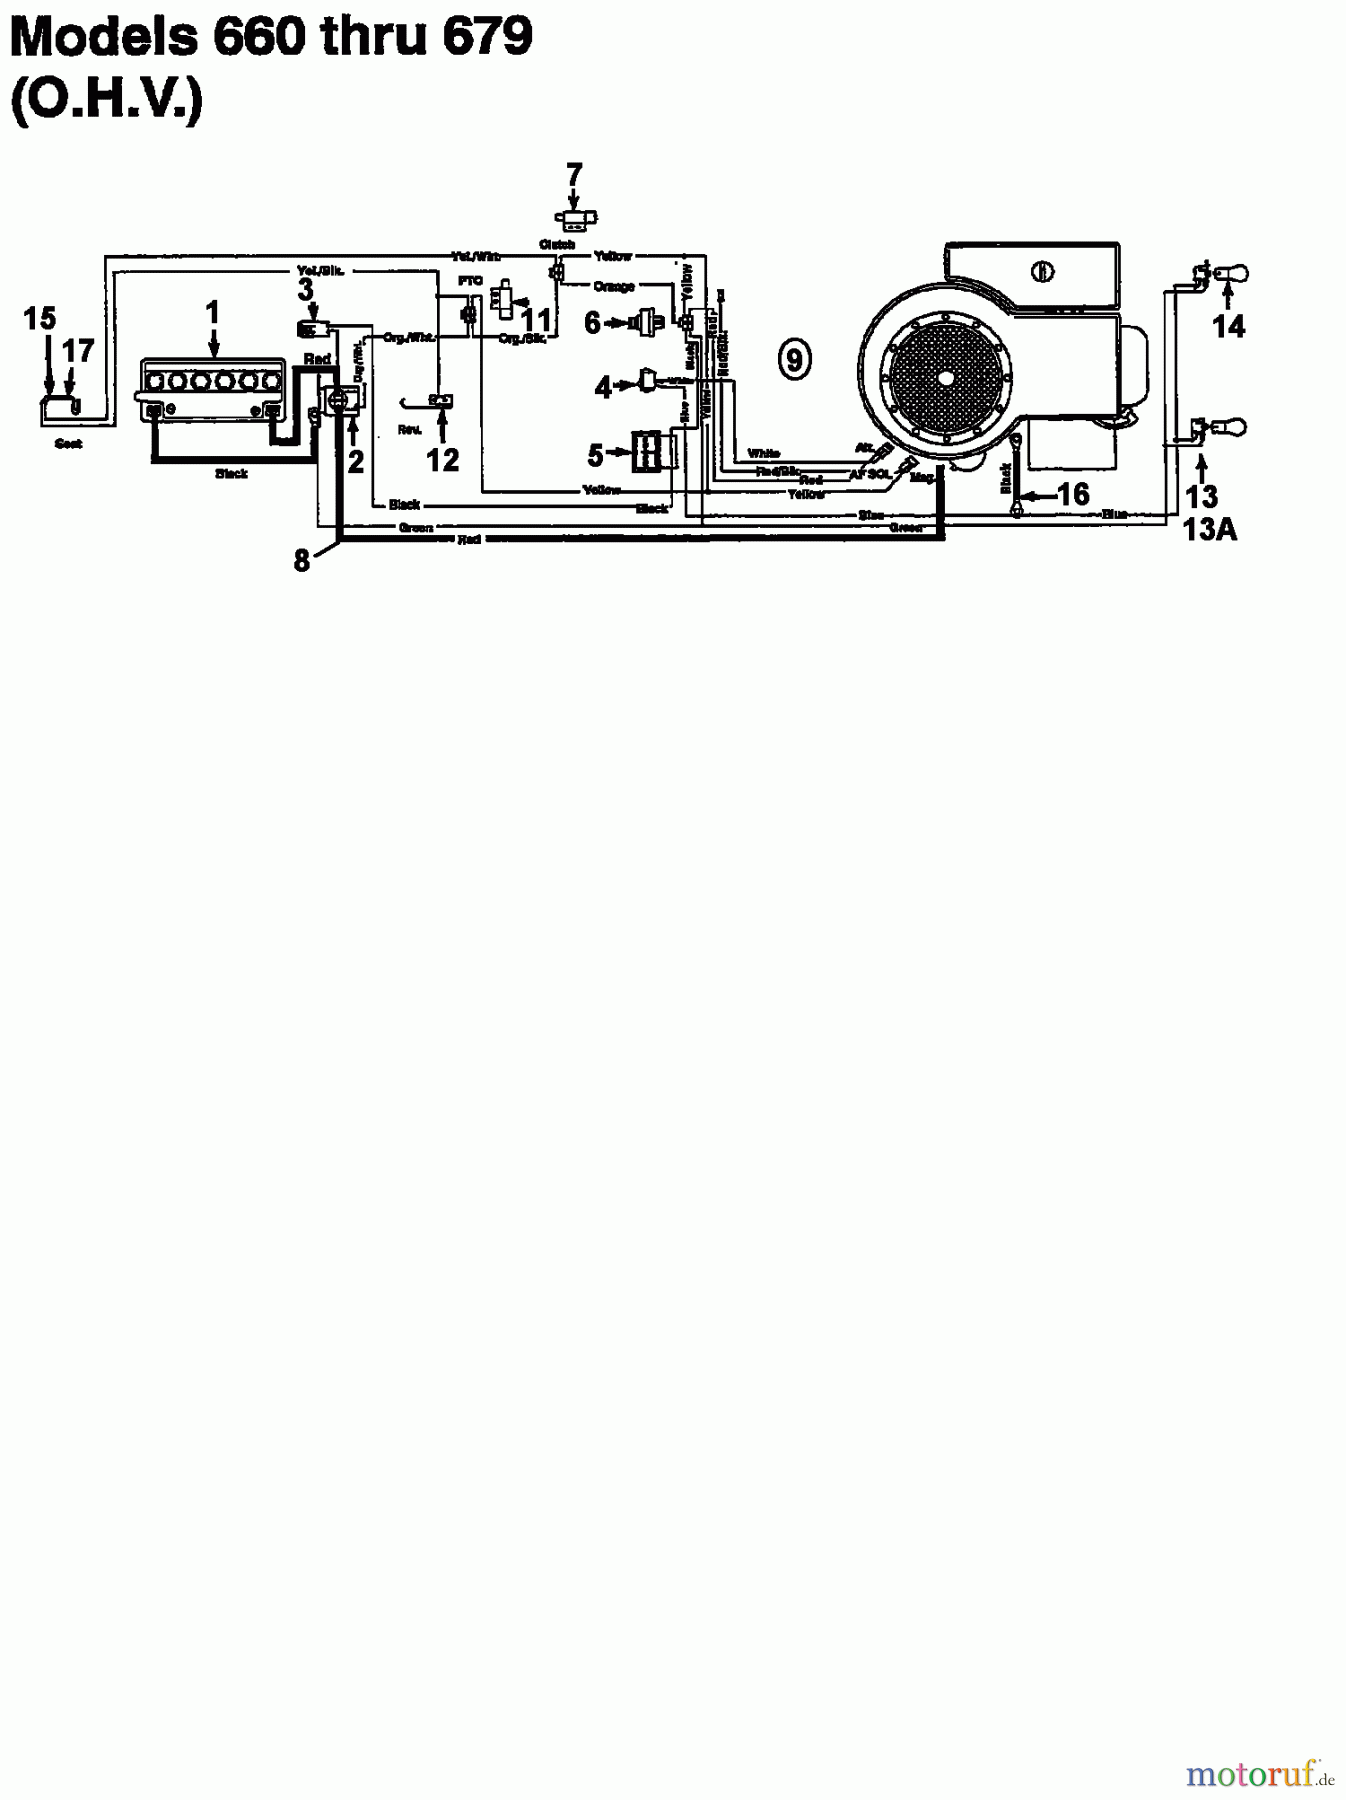  MTD Lawn tractors 11/30 133C679C600  (1993) Wiring diagram for O.H.V.